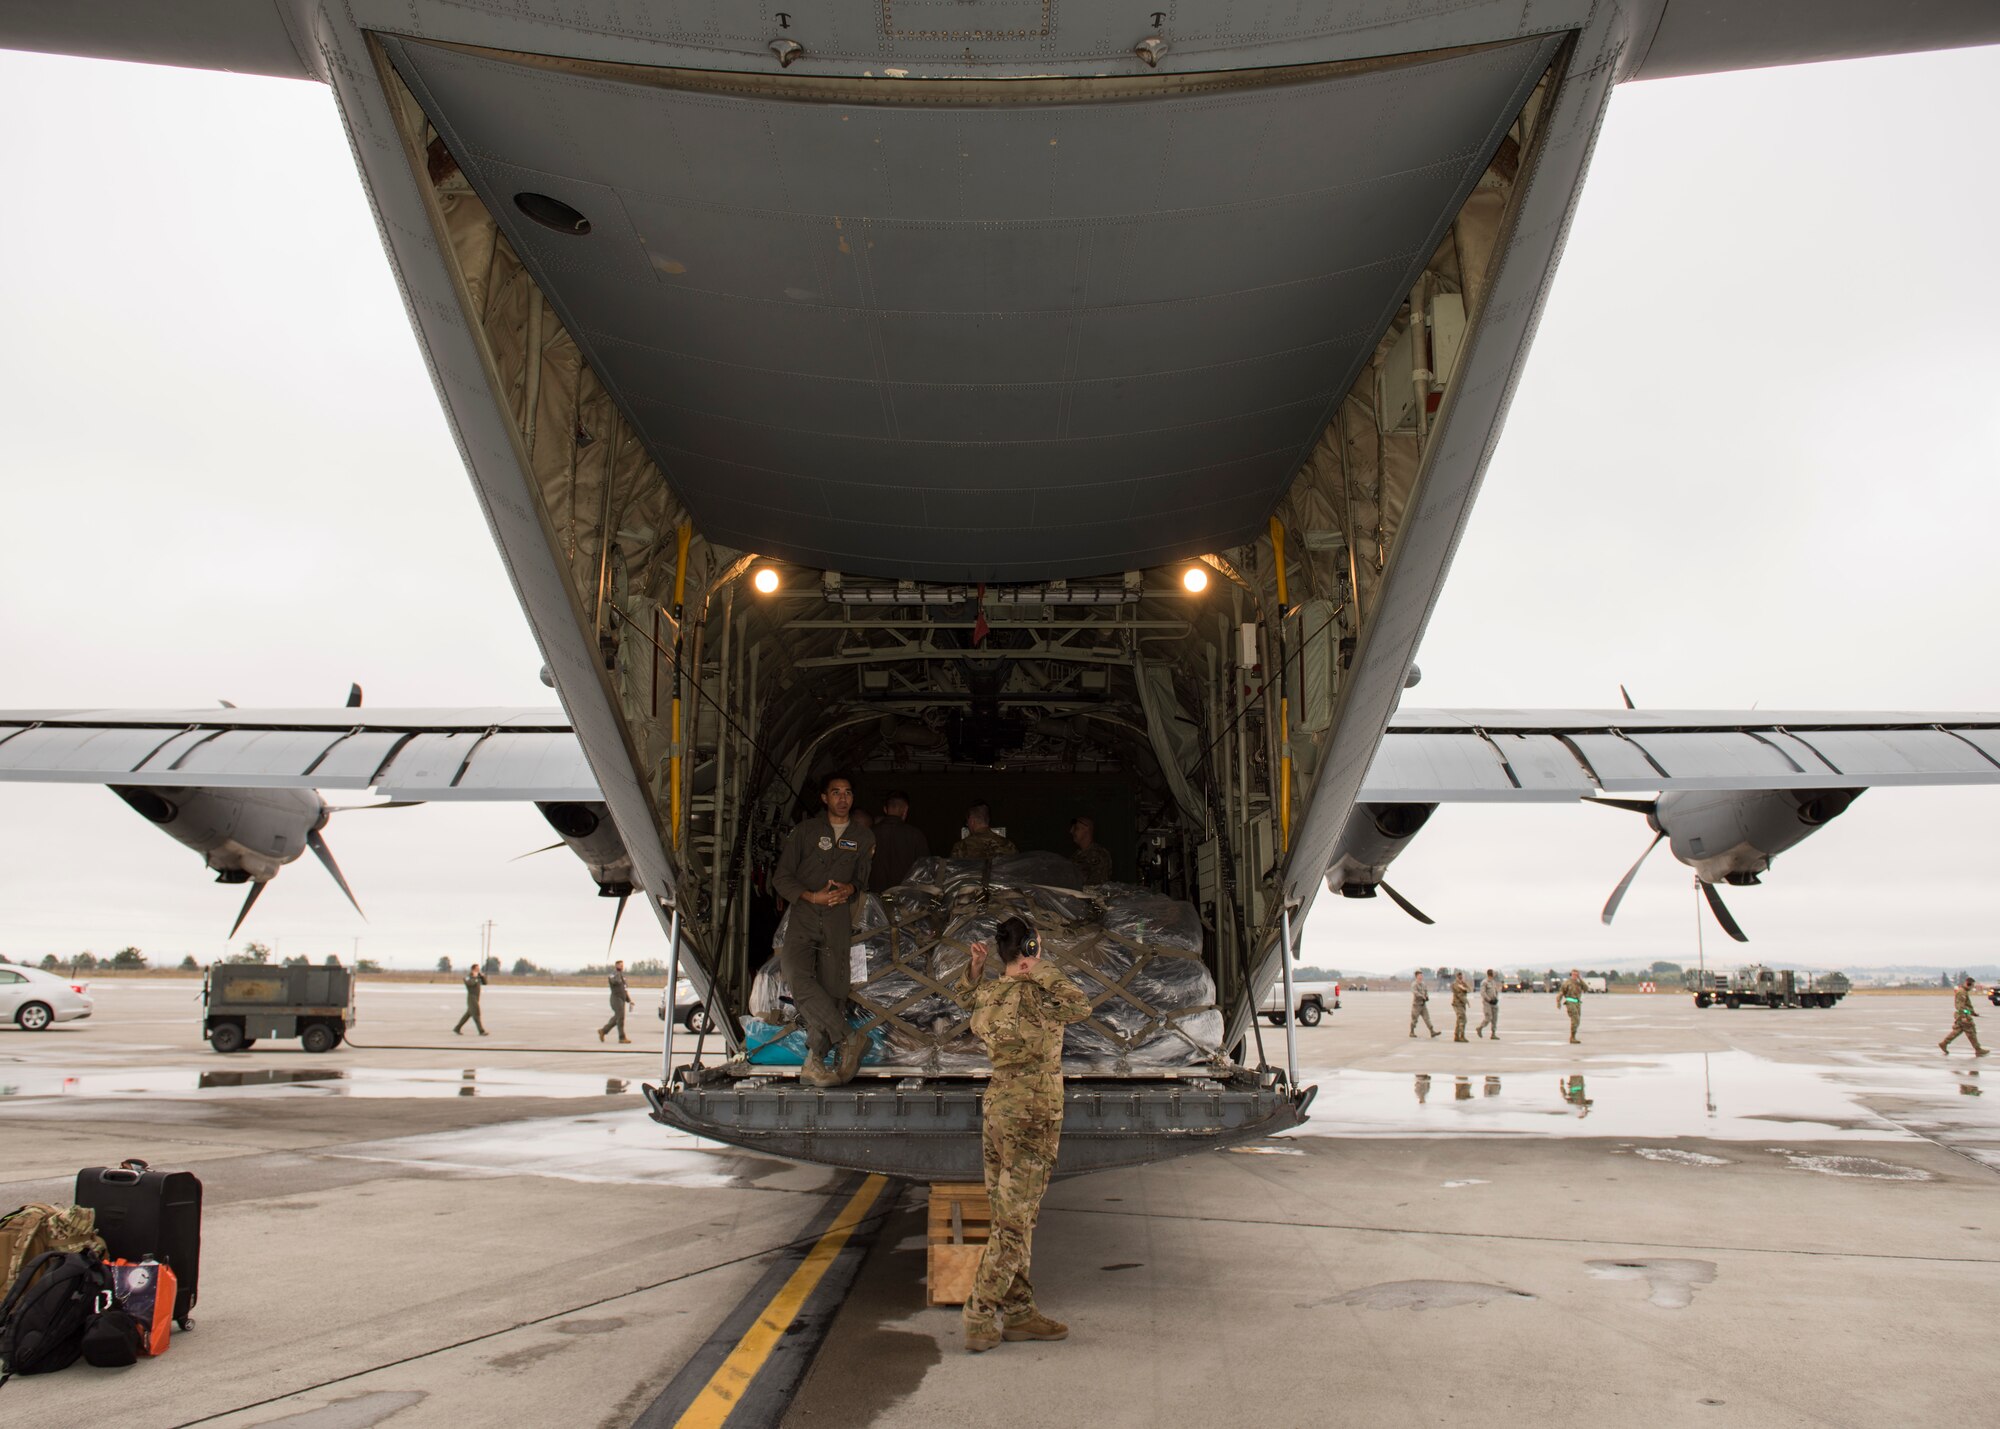 A C-130 Hercules crew from Little Rock Air Force Base, Arkansas, prepares to unload cargo at the start of Air Mobility Command’s Mobility Guardian 2019 exercise at Fairchild Air Force Base, Washington, Sept. 8, 2019. Through robust and relevant training, Mobility Guardian is designed to build full spectrum readiness and develop Air Mobility Airmen to ensure we deliver rapid global mobility now and in the future. (U.S. Air Force photo by Senior Airman Ryan Lackey)